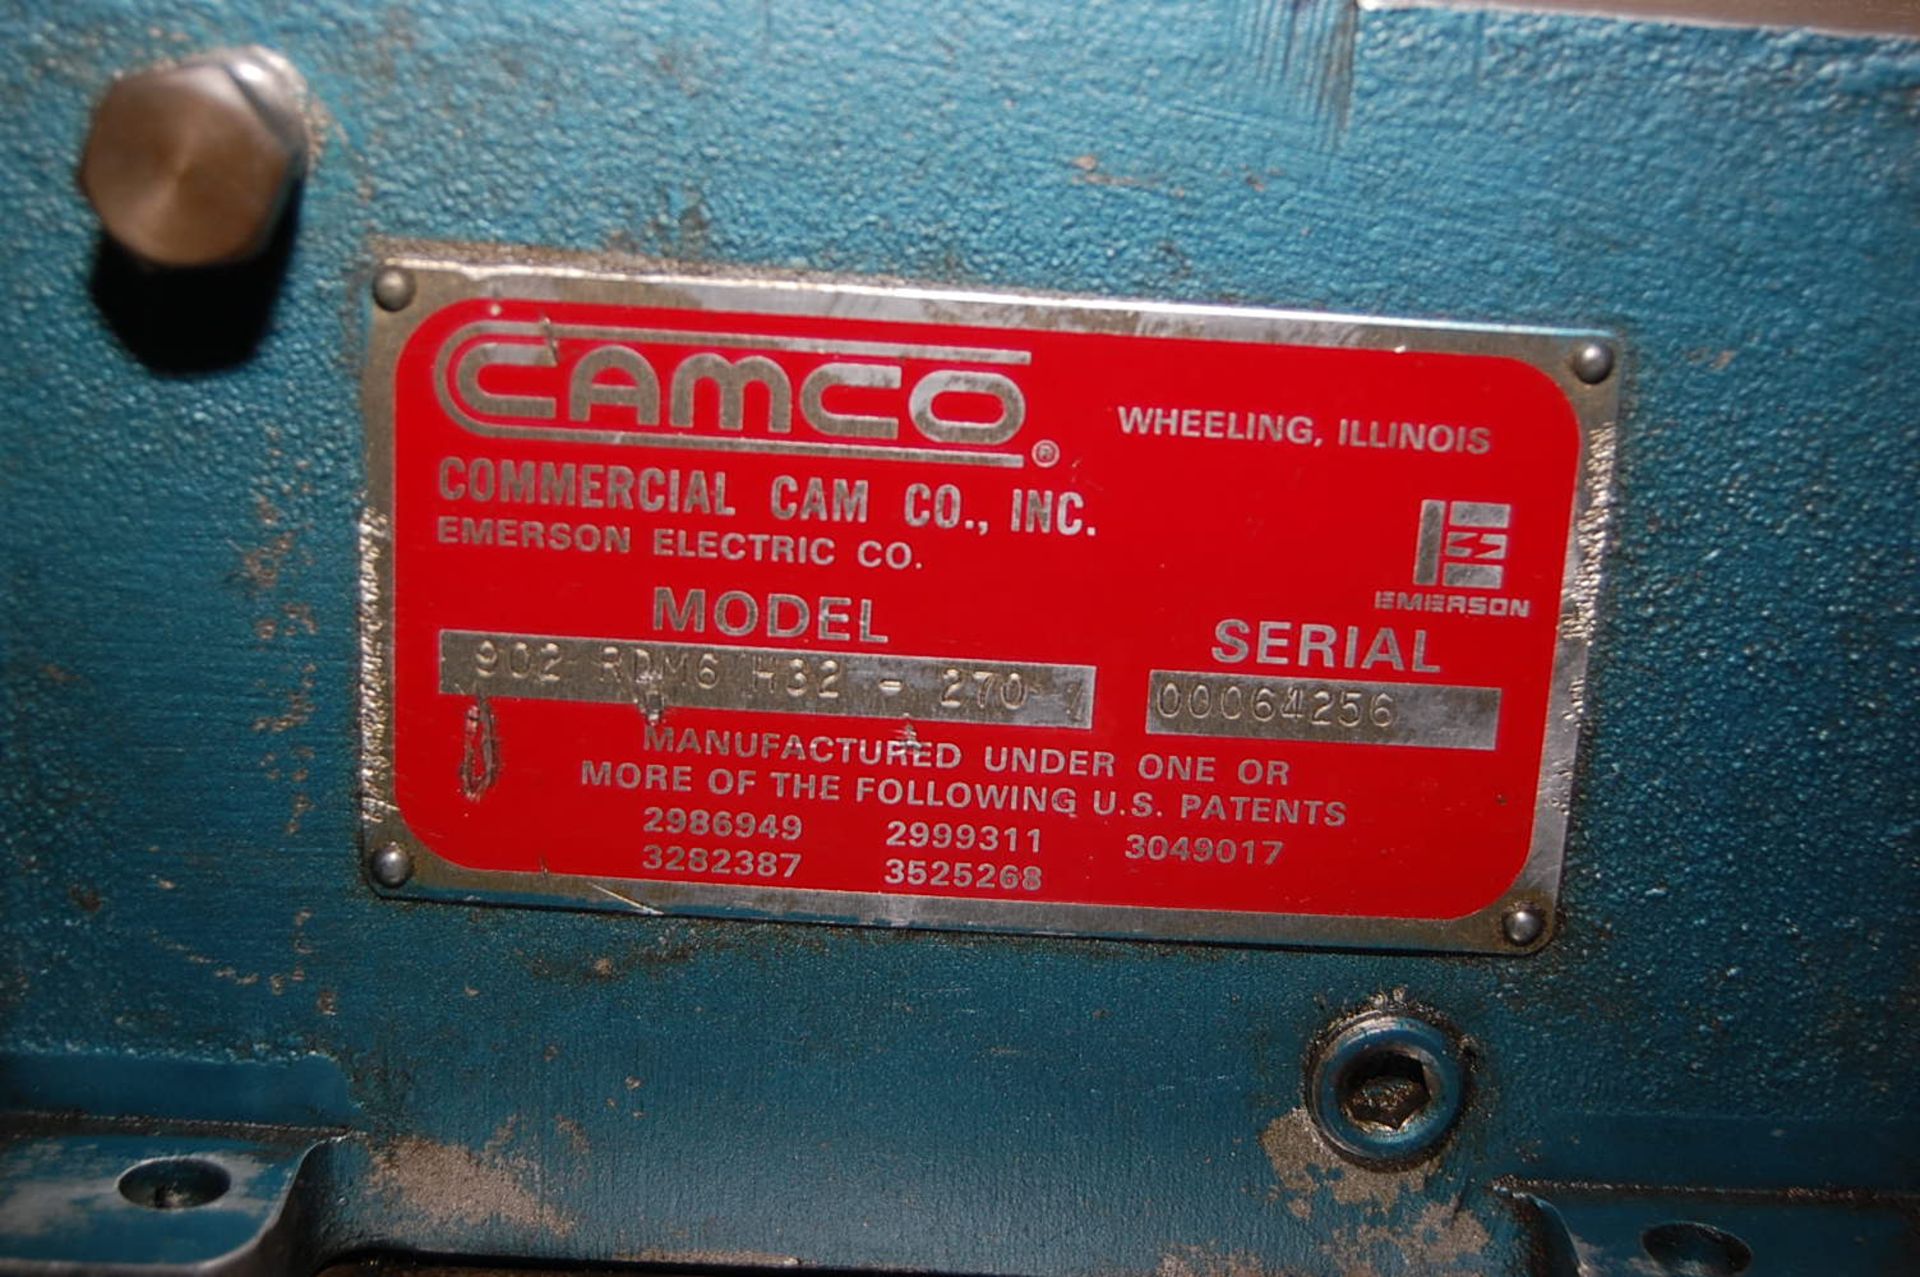 Camco Model #902-RDM6-H32-270, Motorized Rotary Indexers, 1/2 HP Motor, Serial #64256 - Image 2 of 2